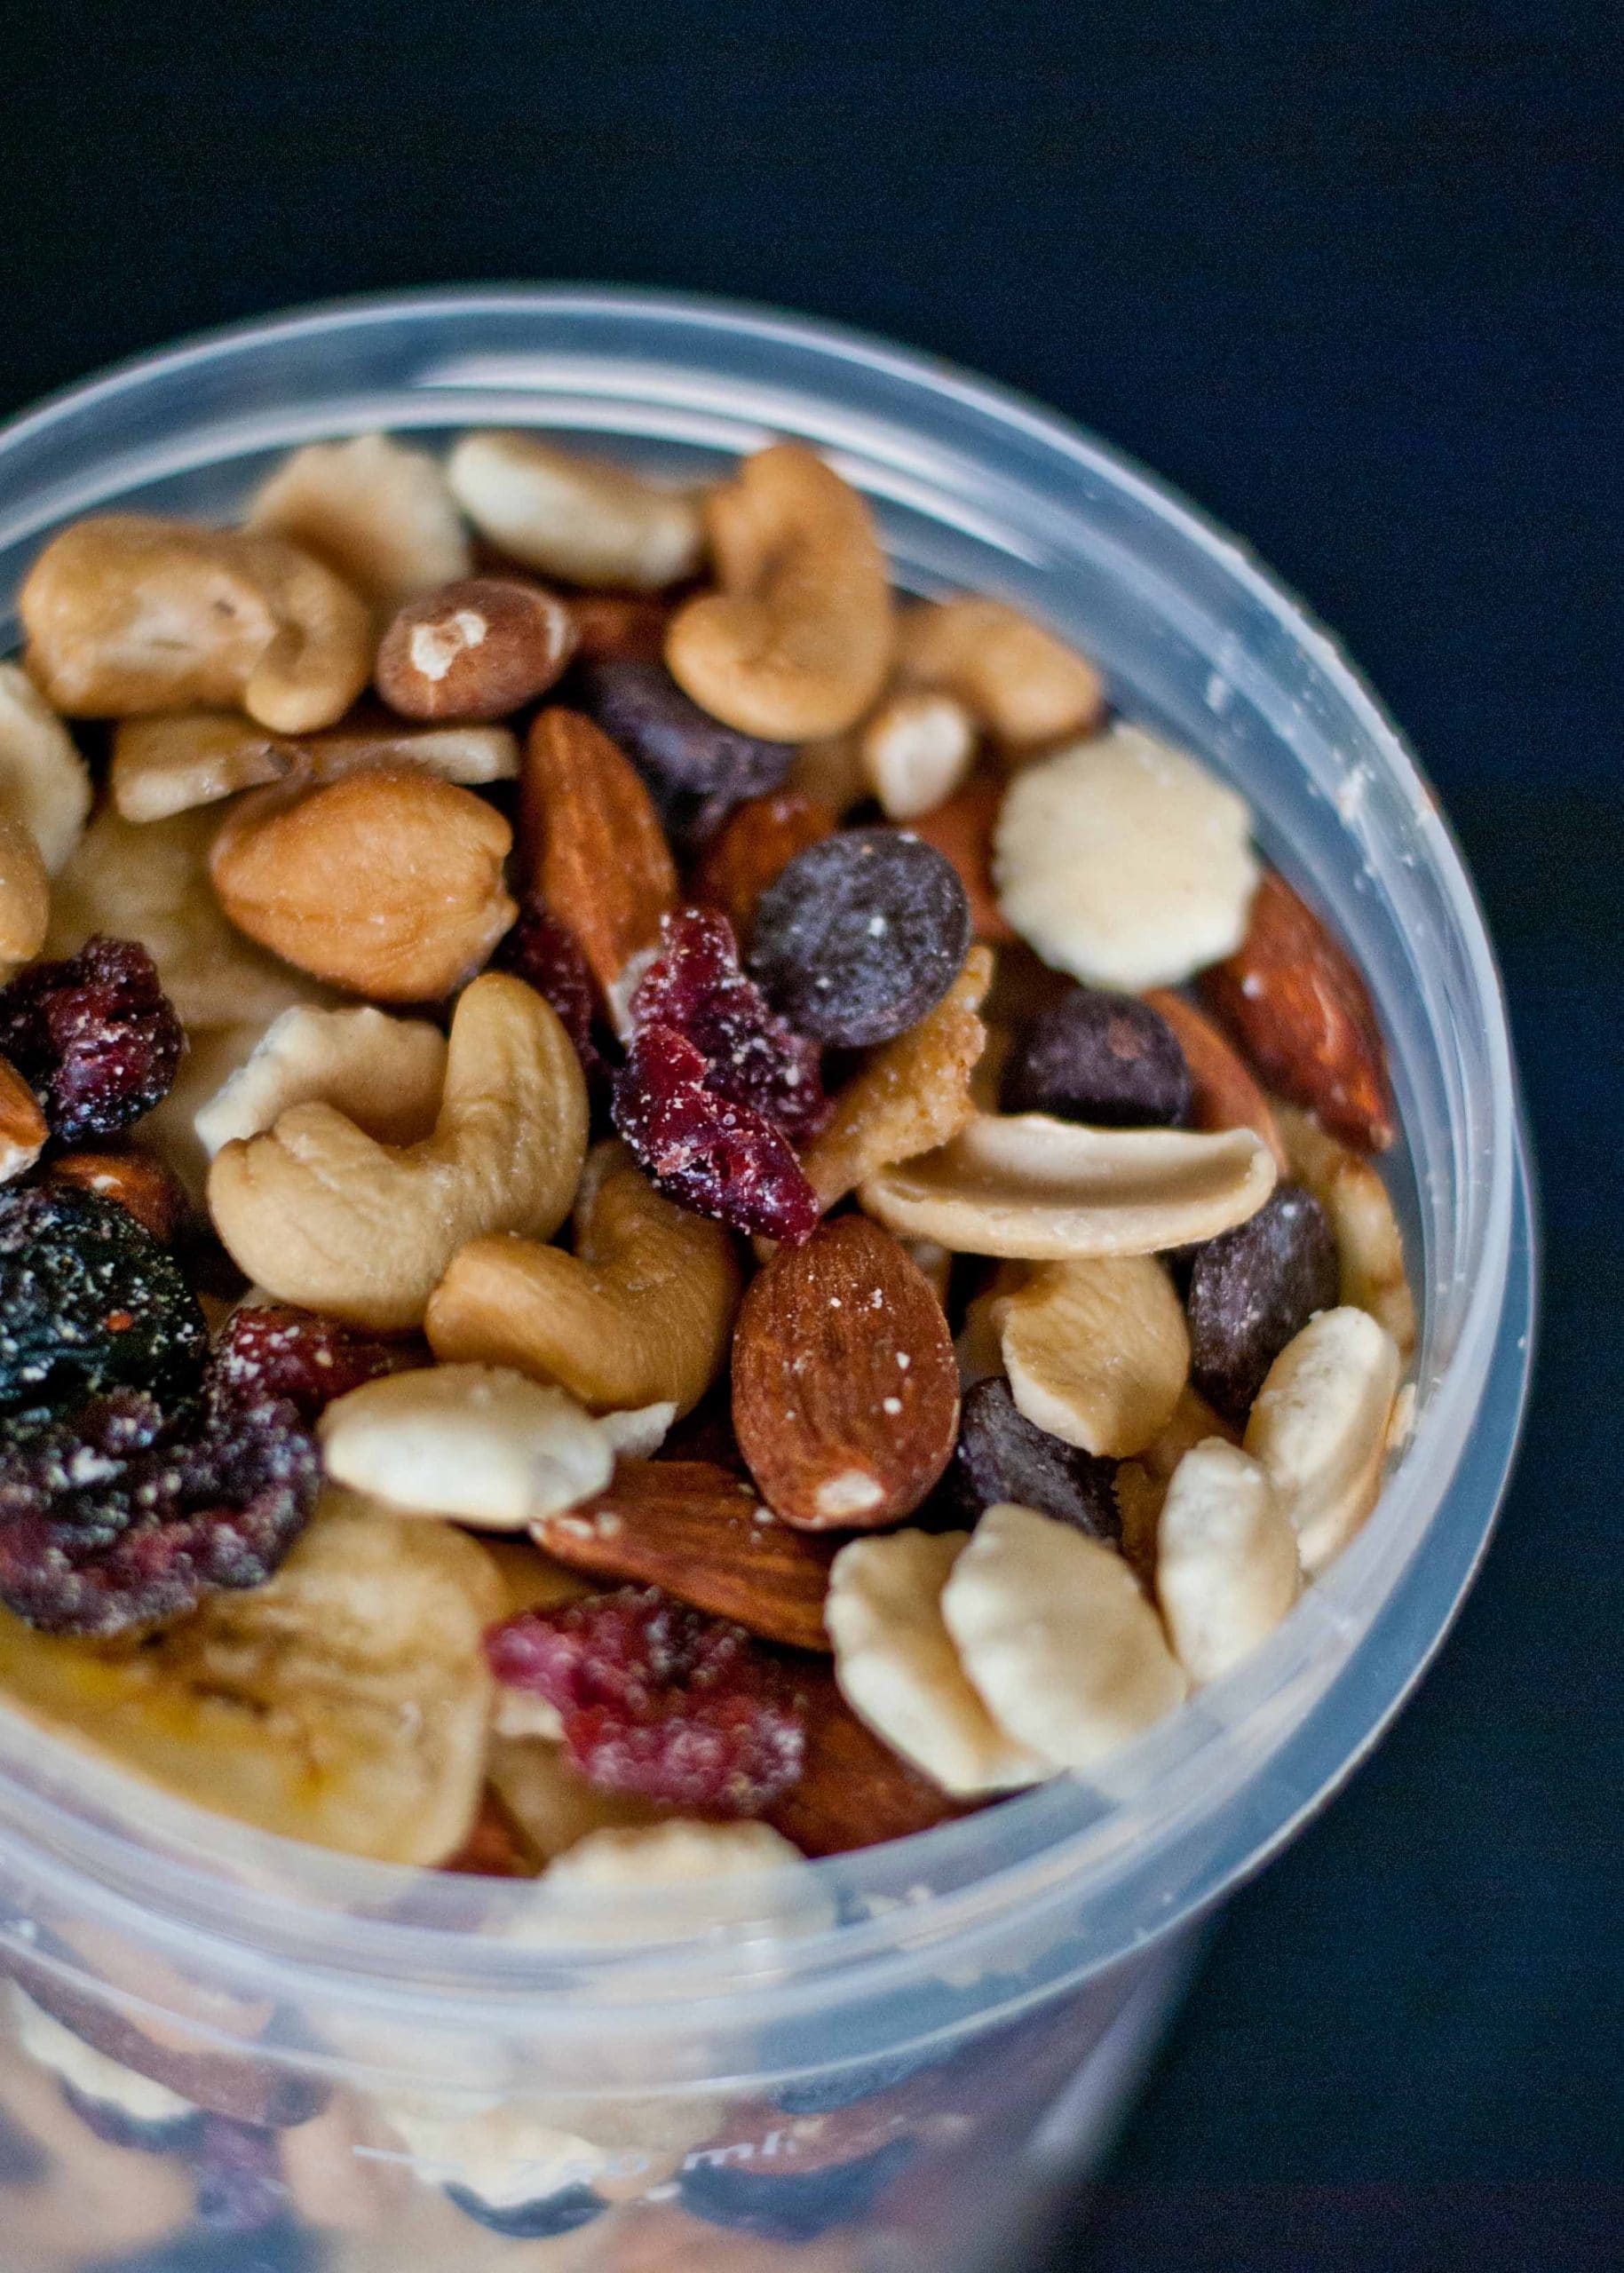 How To Make Healthy Sweet and Salty Trail Mix | Neighborfoodblog.com